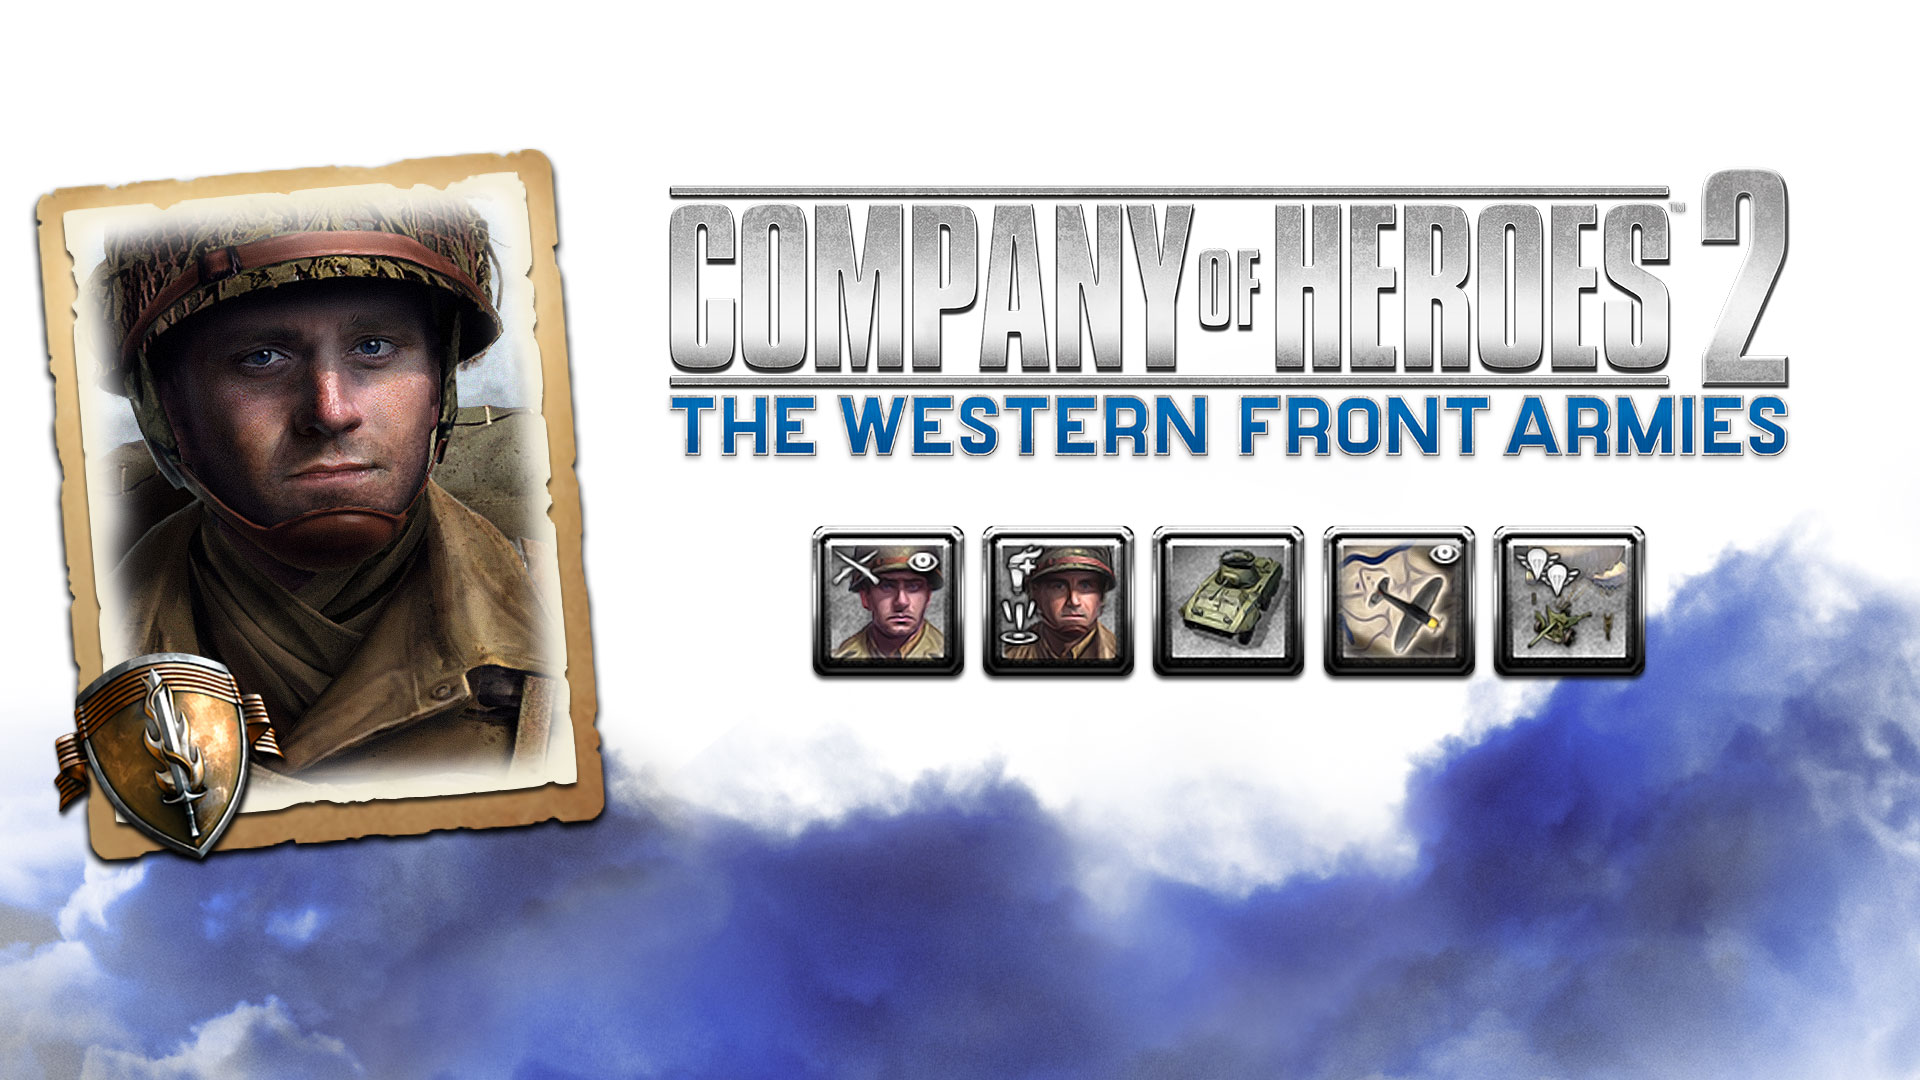 Company of Heroes 2 - US Forces Commander: Recon Support Company DLC Steam CD Key [USD 10.16]